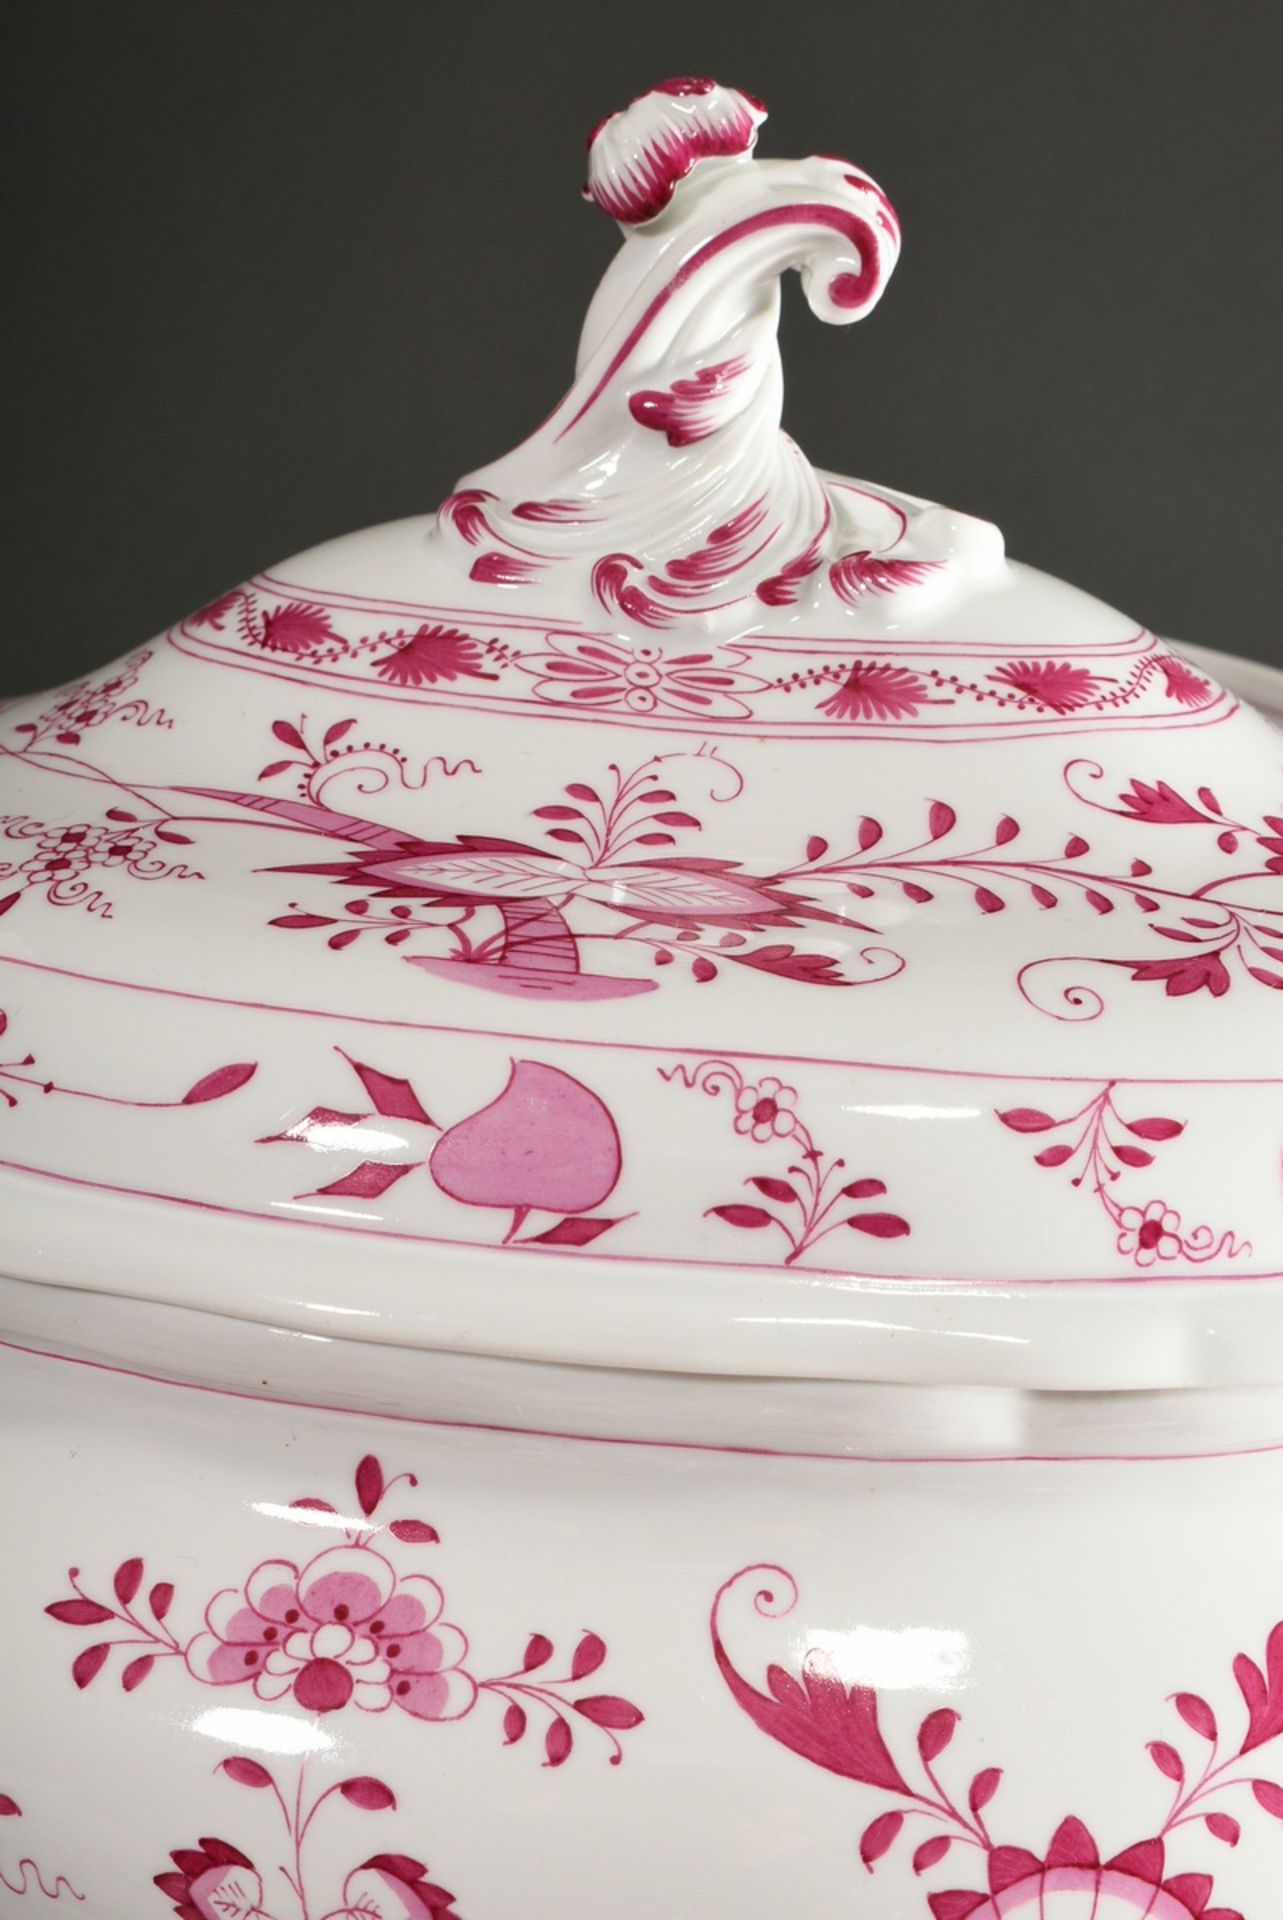 65 Pieces rare Meissen dinner service "Zwiebelmuster Pink", custom made around 1900, consisting of: - Image 11 of 27